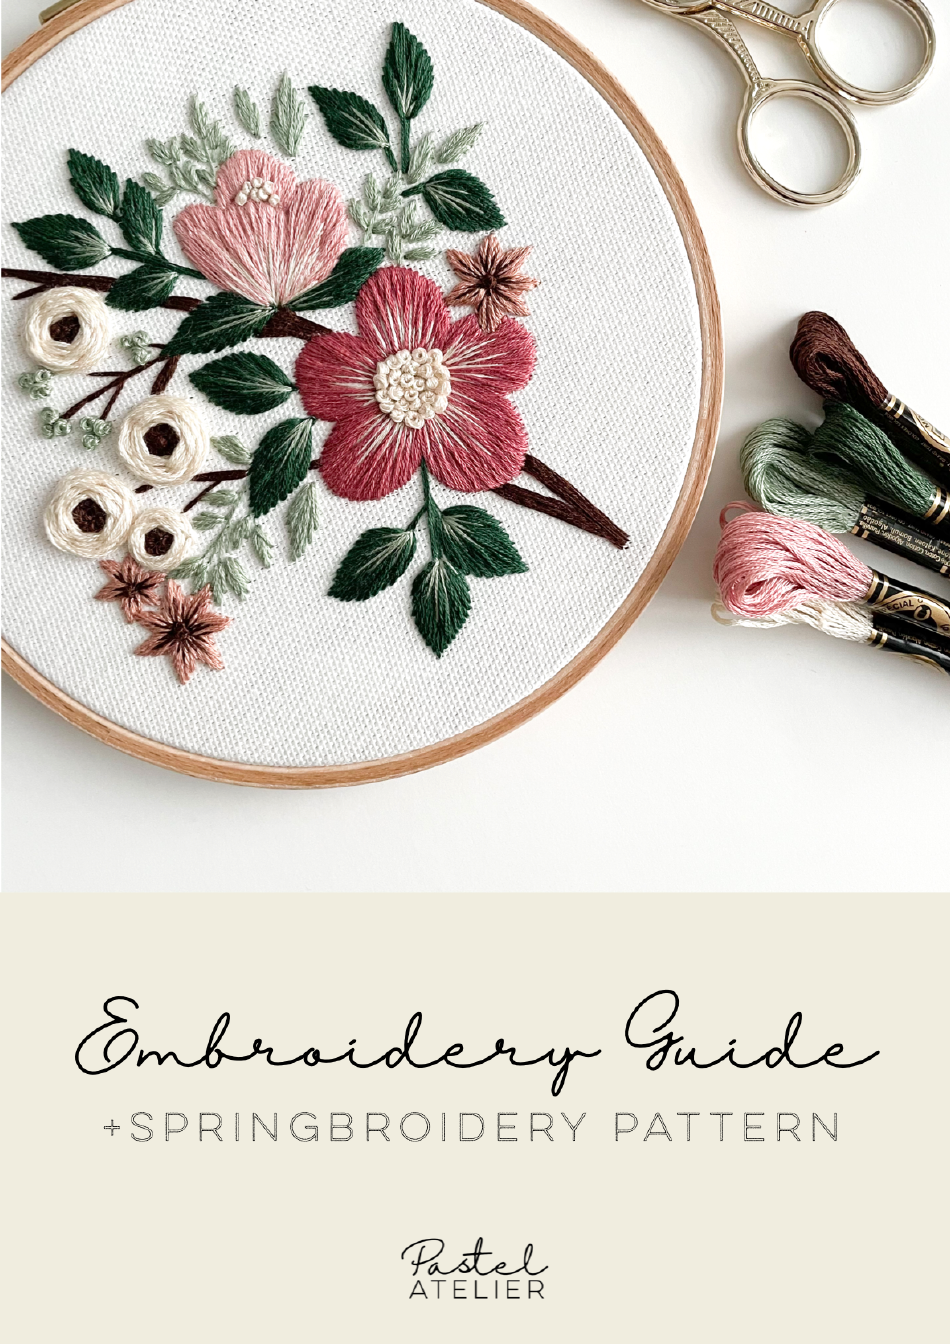 Spring Embroidery Pattern - Beautiful floral design ready for your next embroidery project.